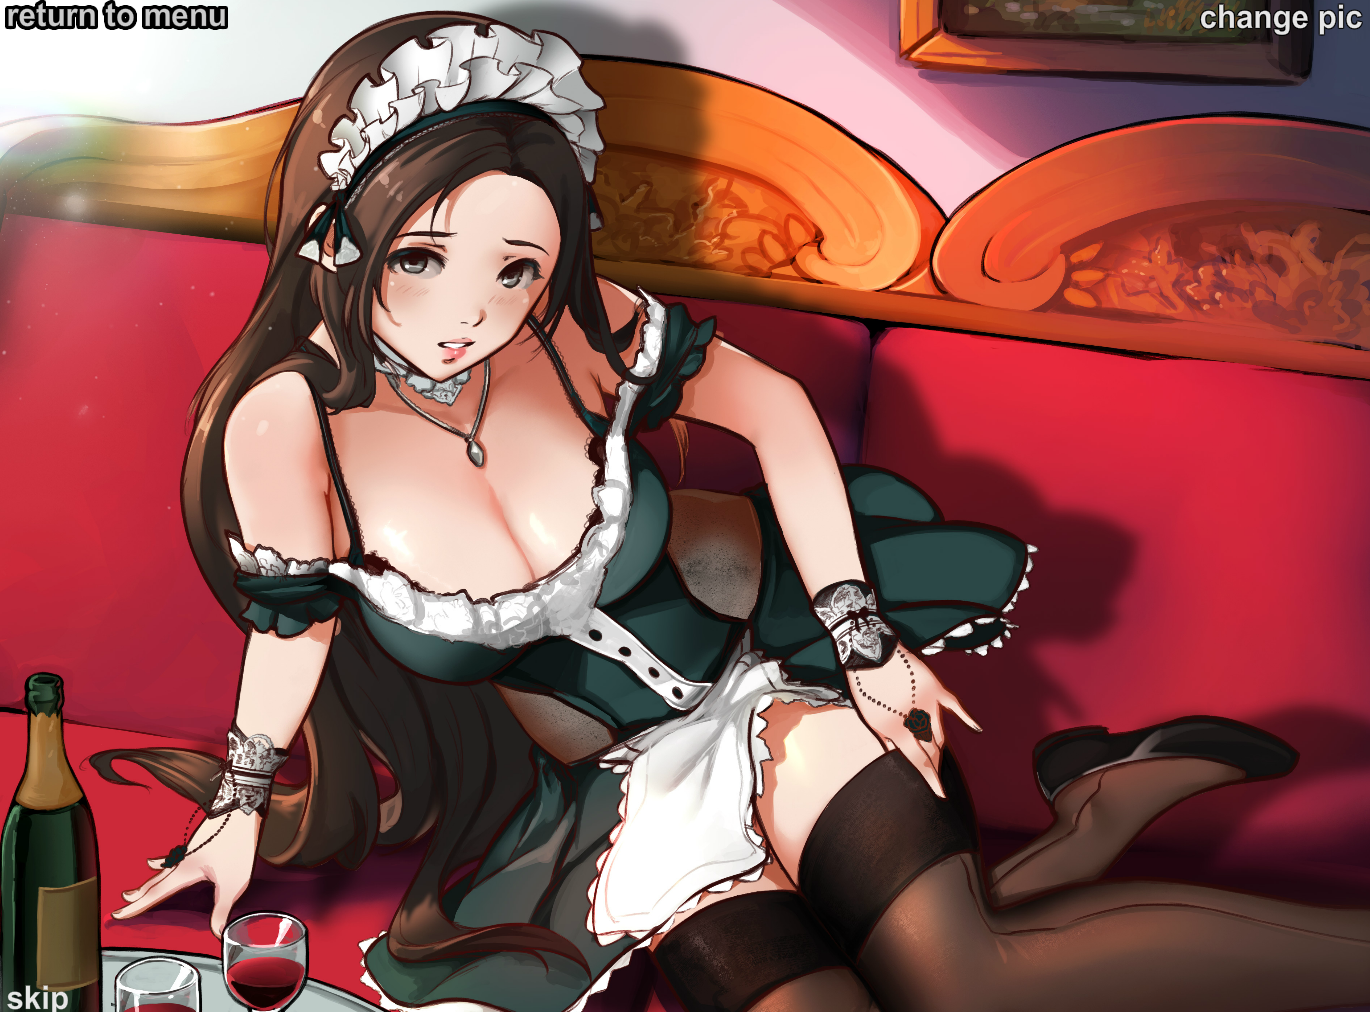 Porn Games Maid - Maid Service [COMPLETED] - free game download, reviews, mega - xGames